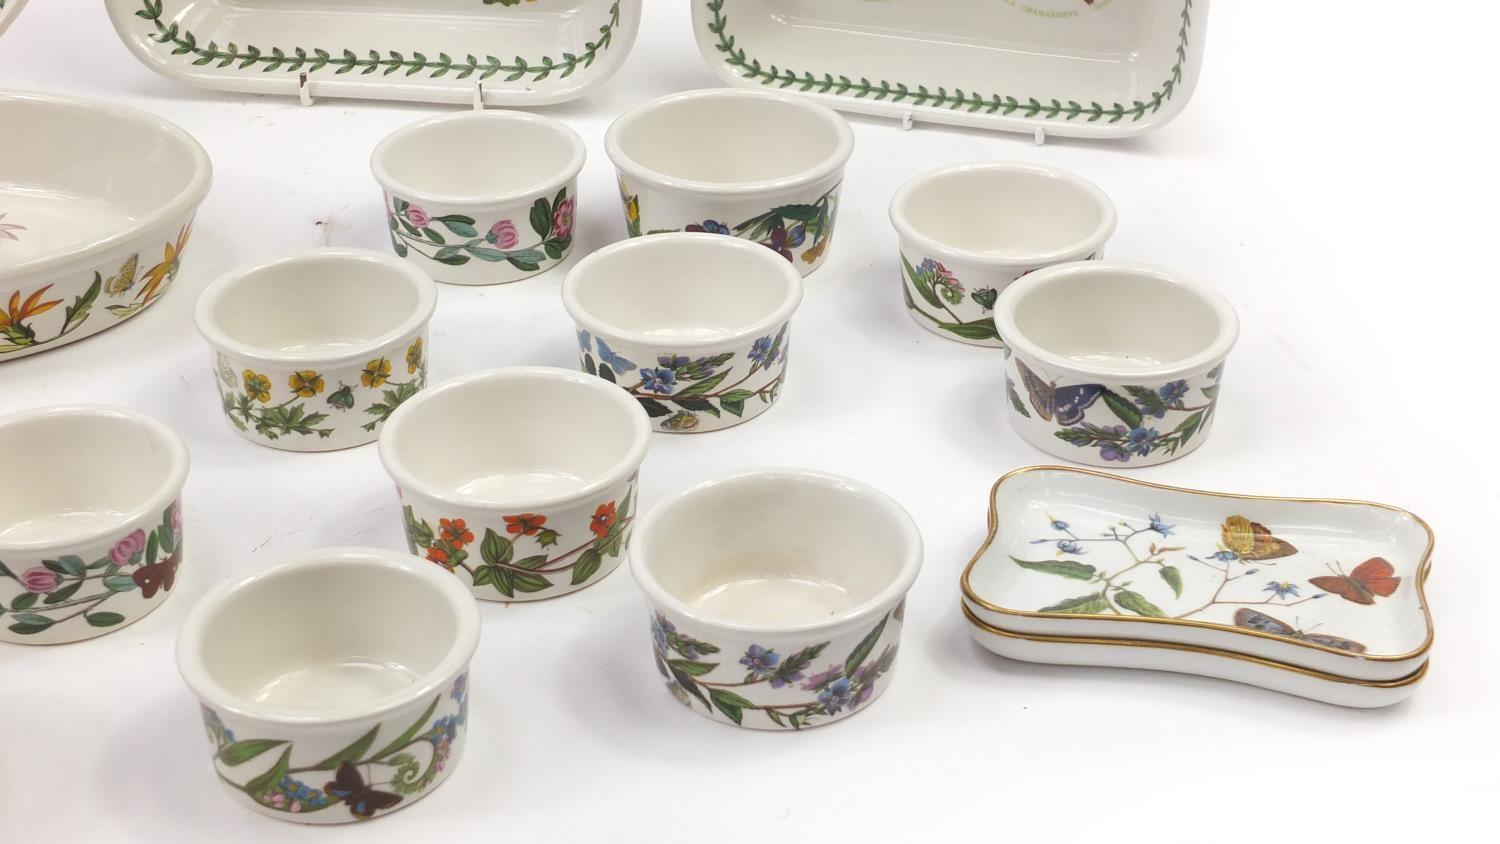 Portmeirion Botanic Garden dinnerware including meat plates and ramekins, the largest 35cm in length - Image 9 of 19